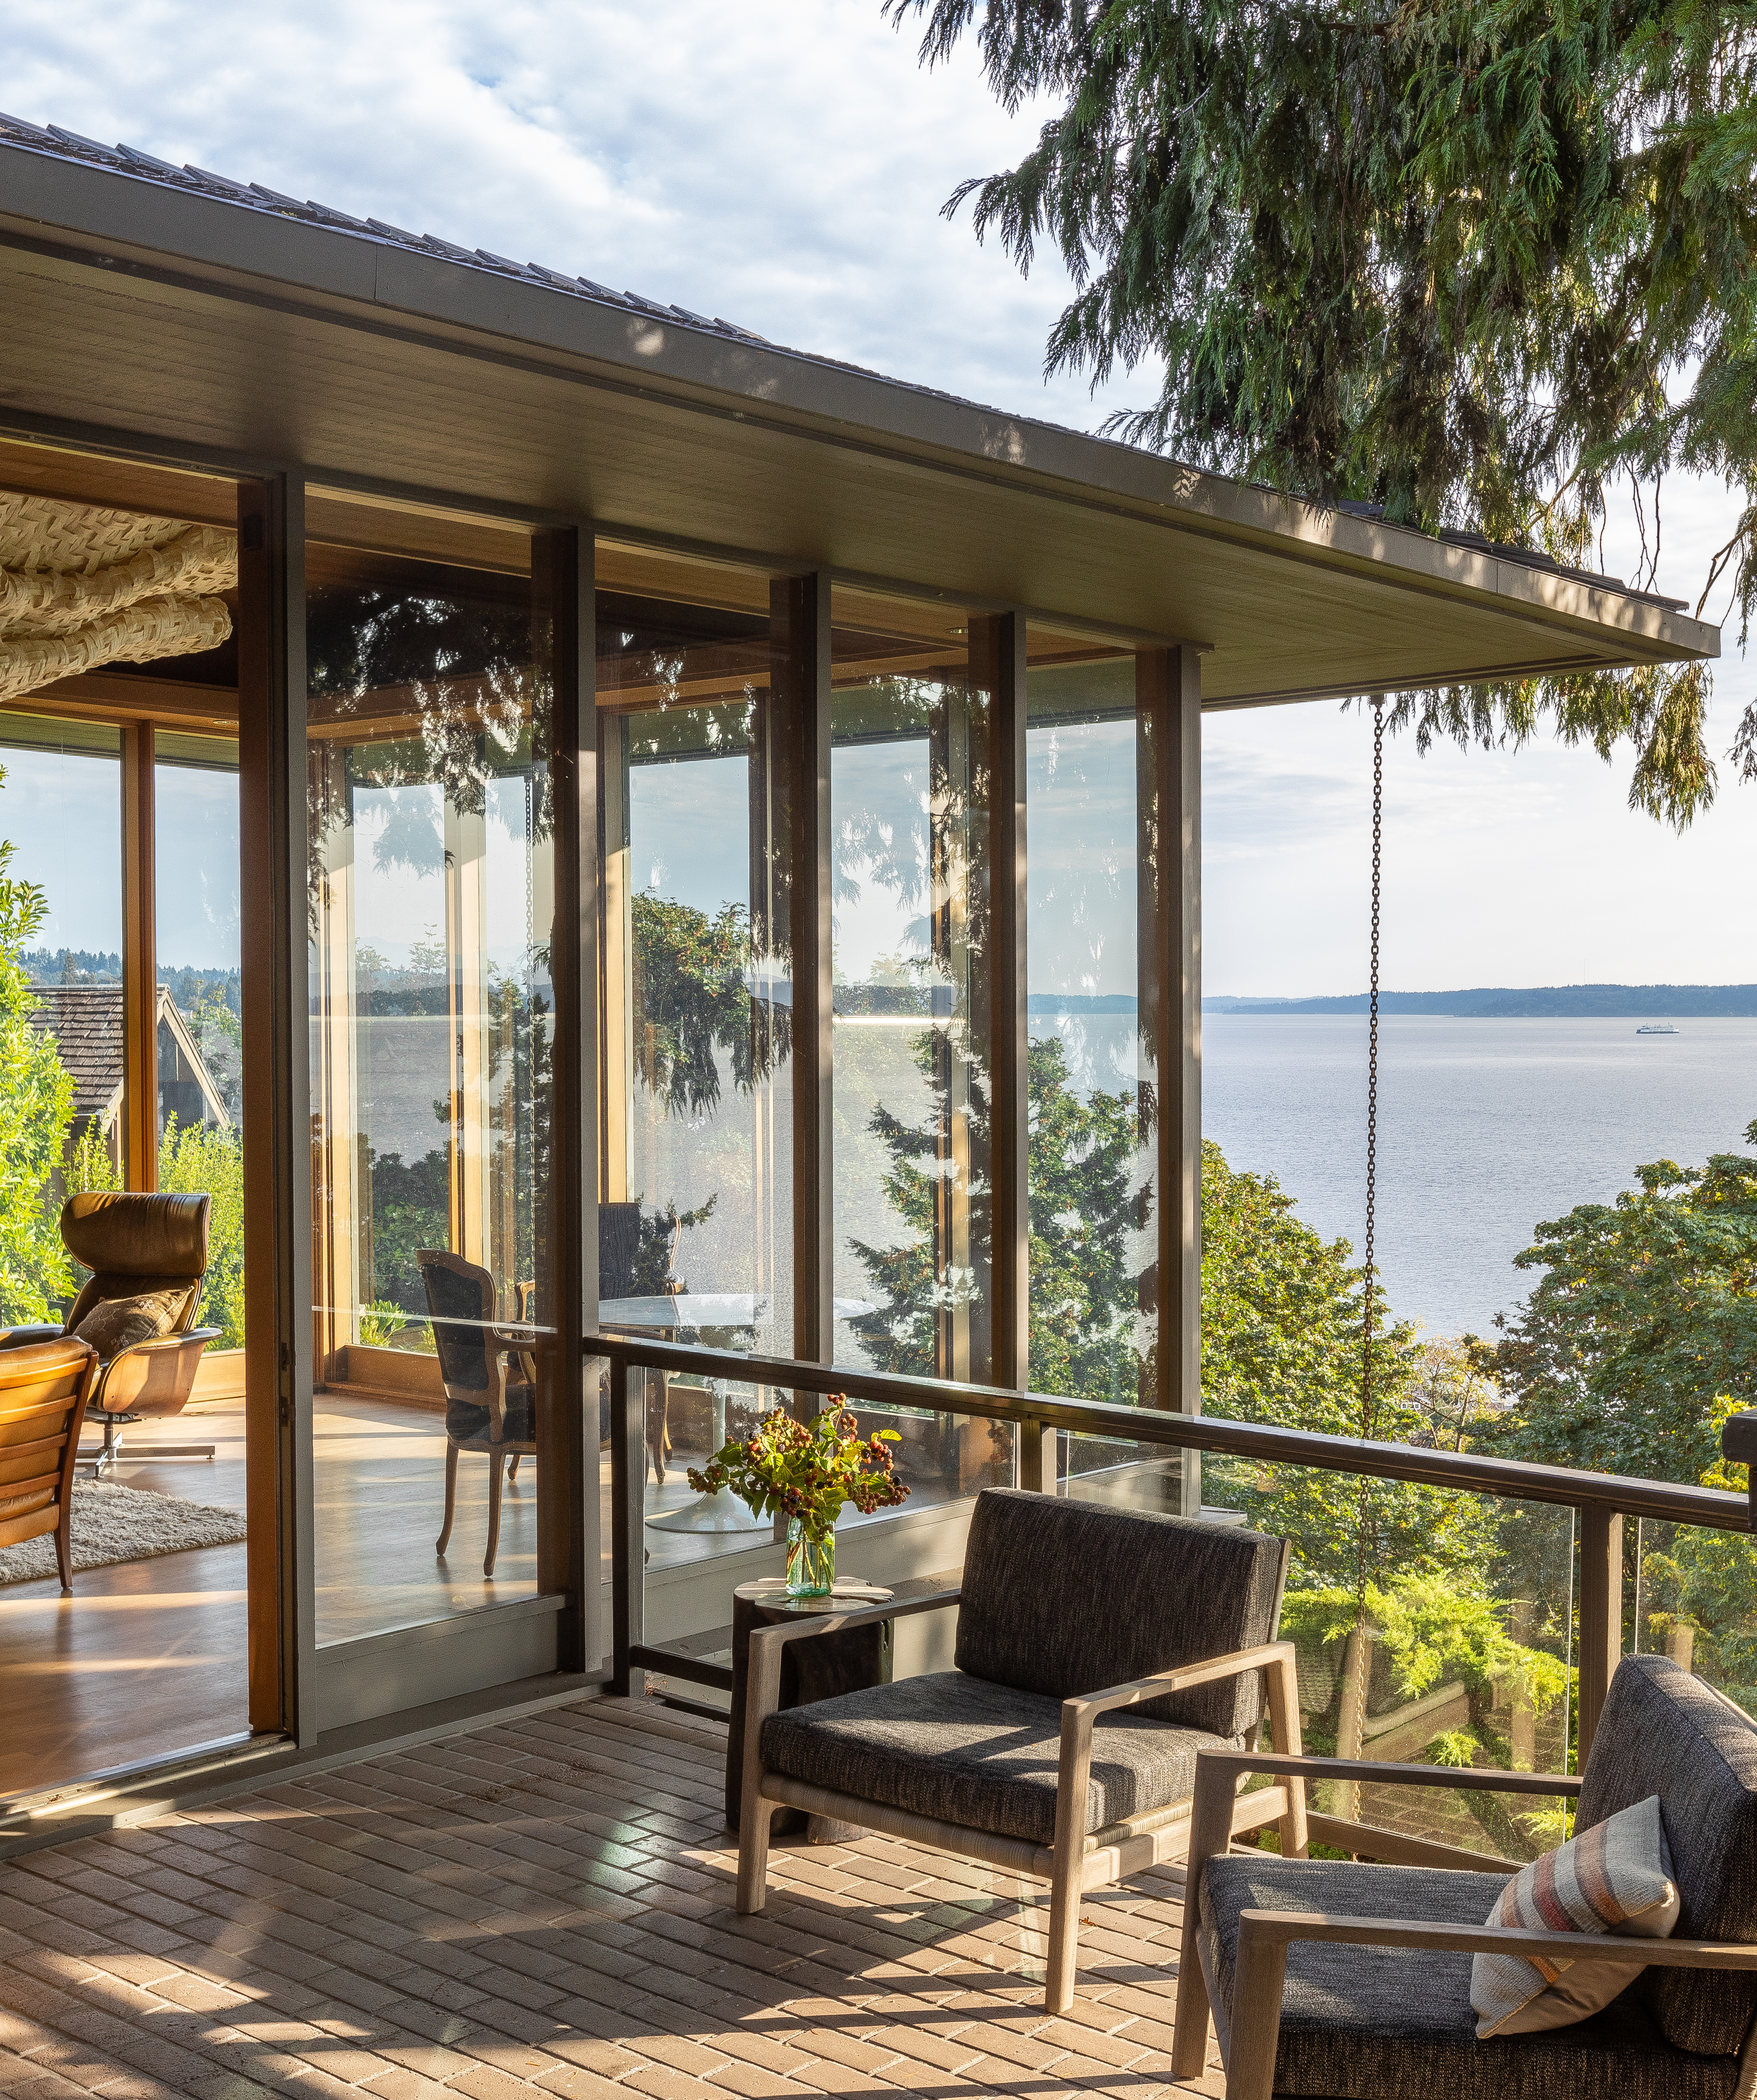 The living space, with its floor-to-ceiling windows and patio access, feels like a glass box nestled in the trees. Inside or out, the panoramic view is breathtaking.